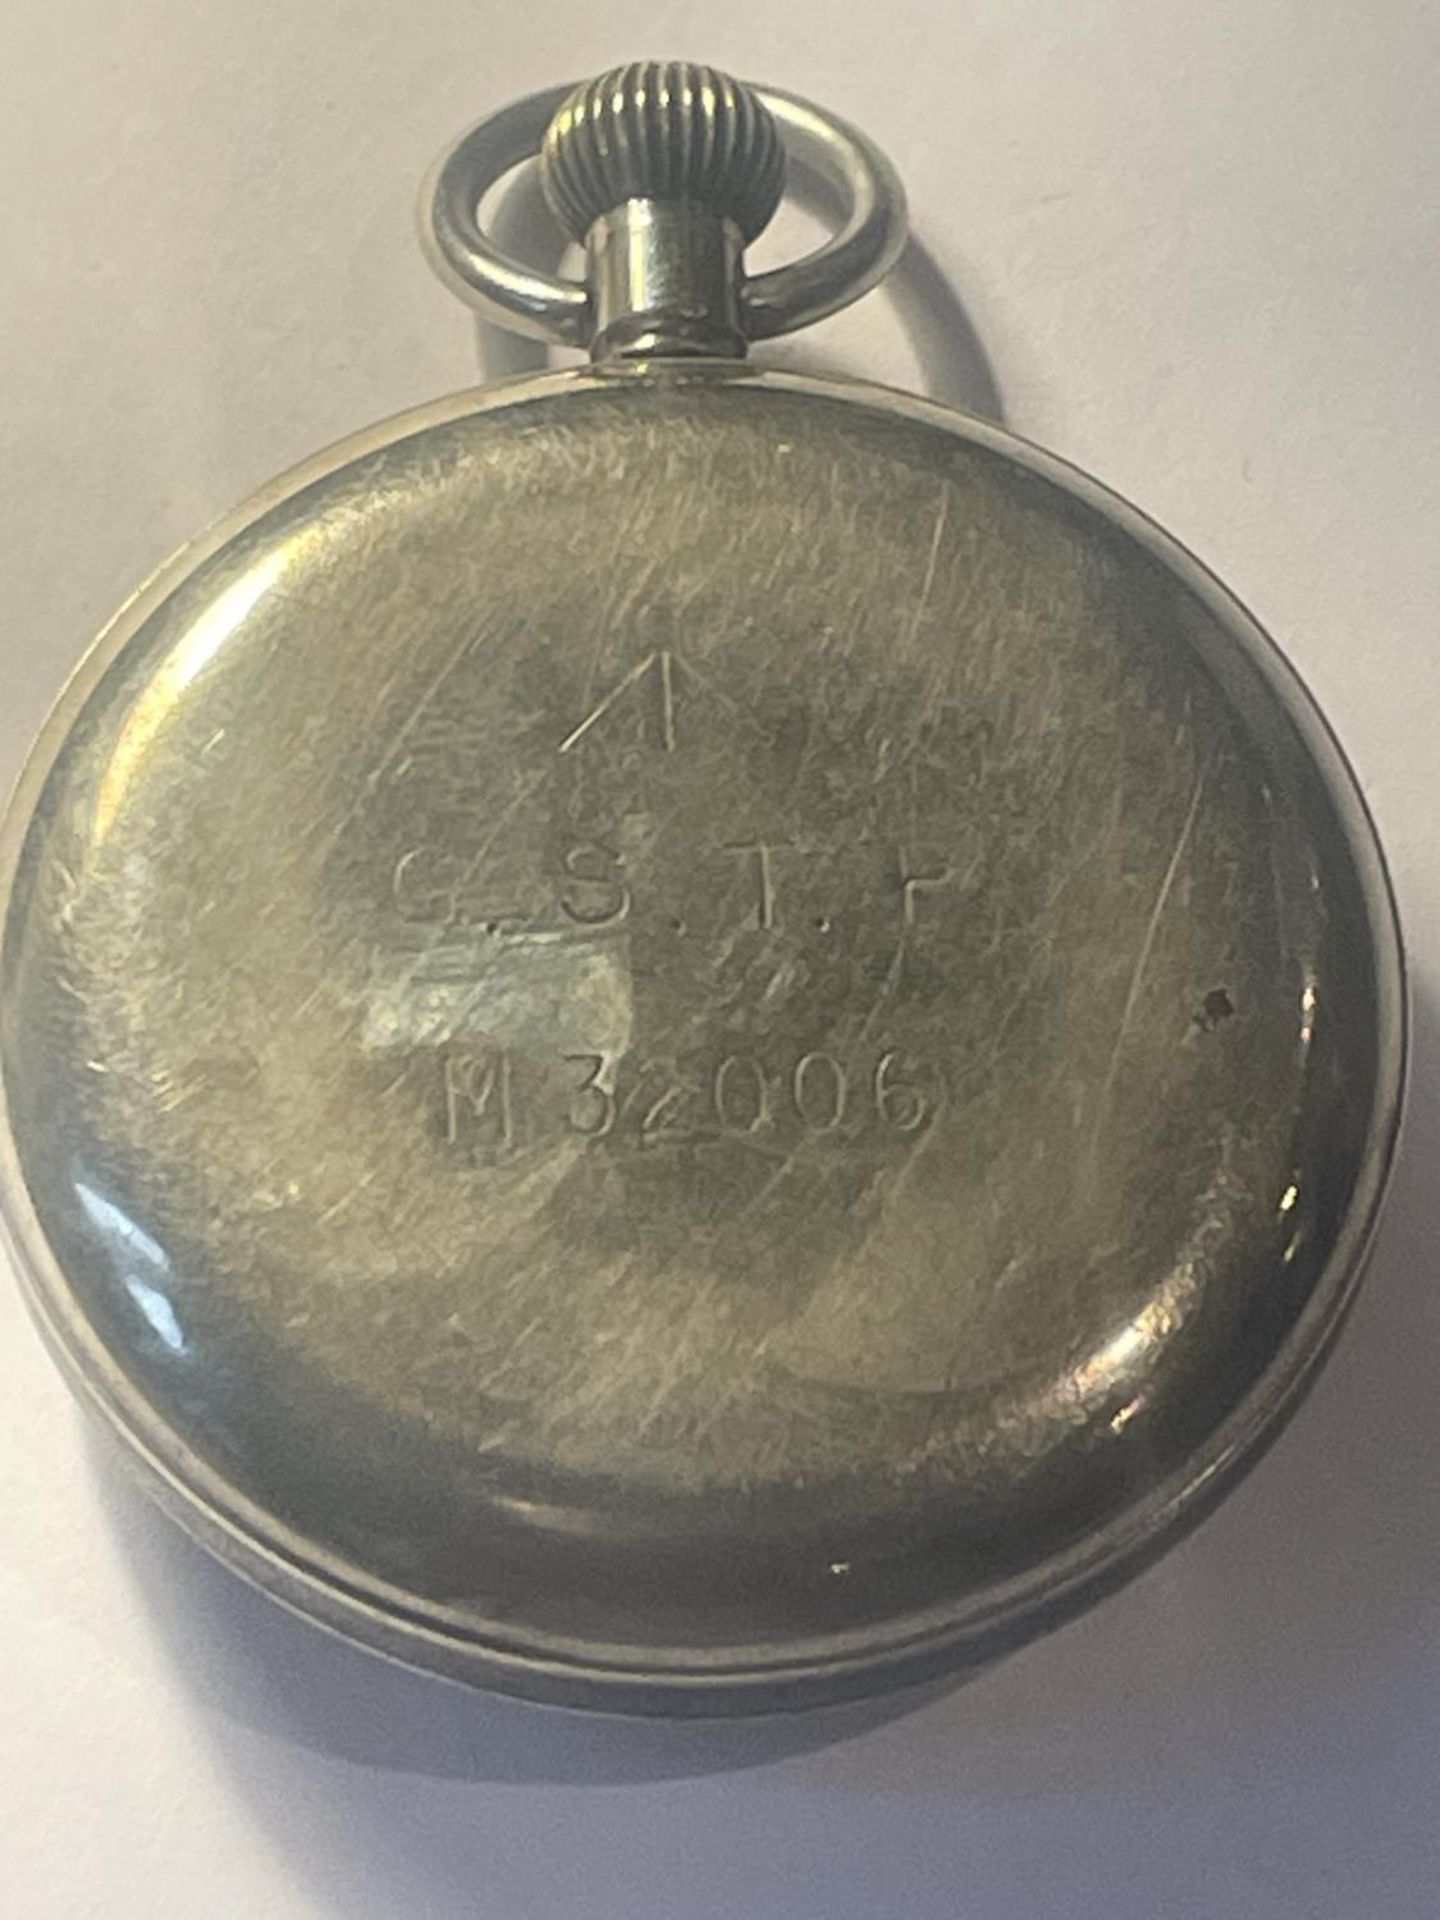 A MILITARY POCKET WATCH WITH CROWS FOOT SEEN WORKING BUT NO WARRANTY - Image 2 of 3